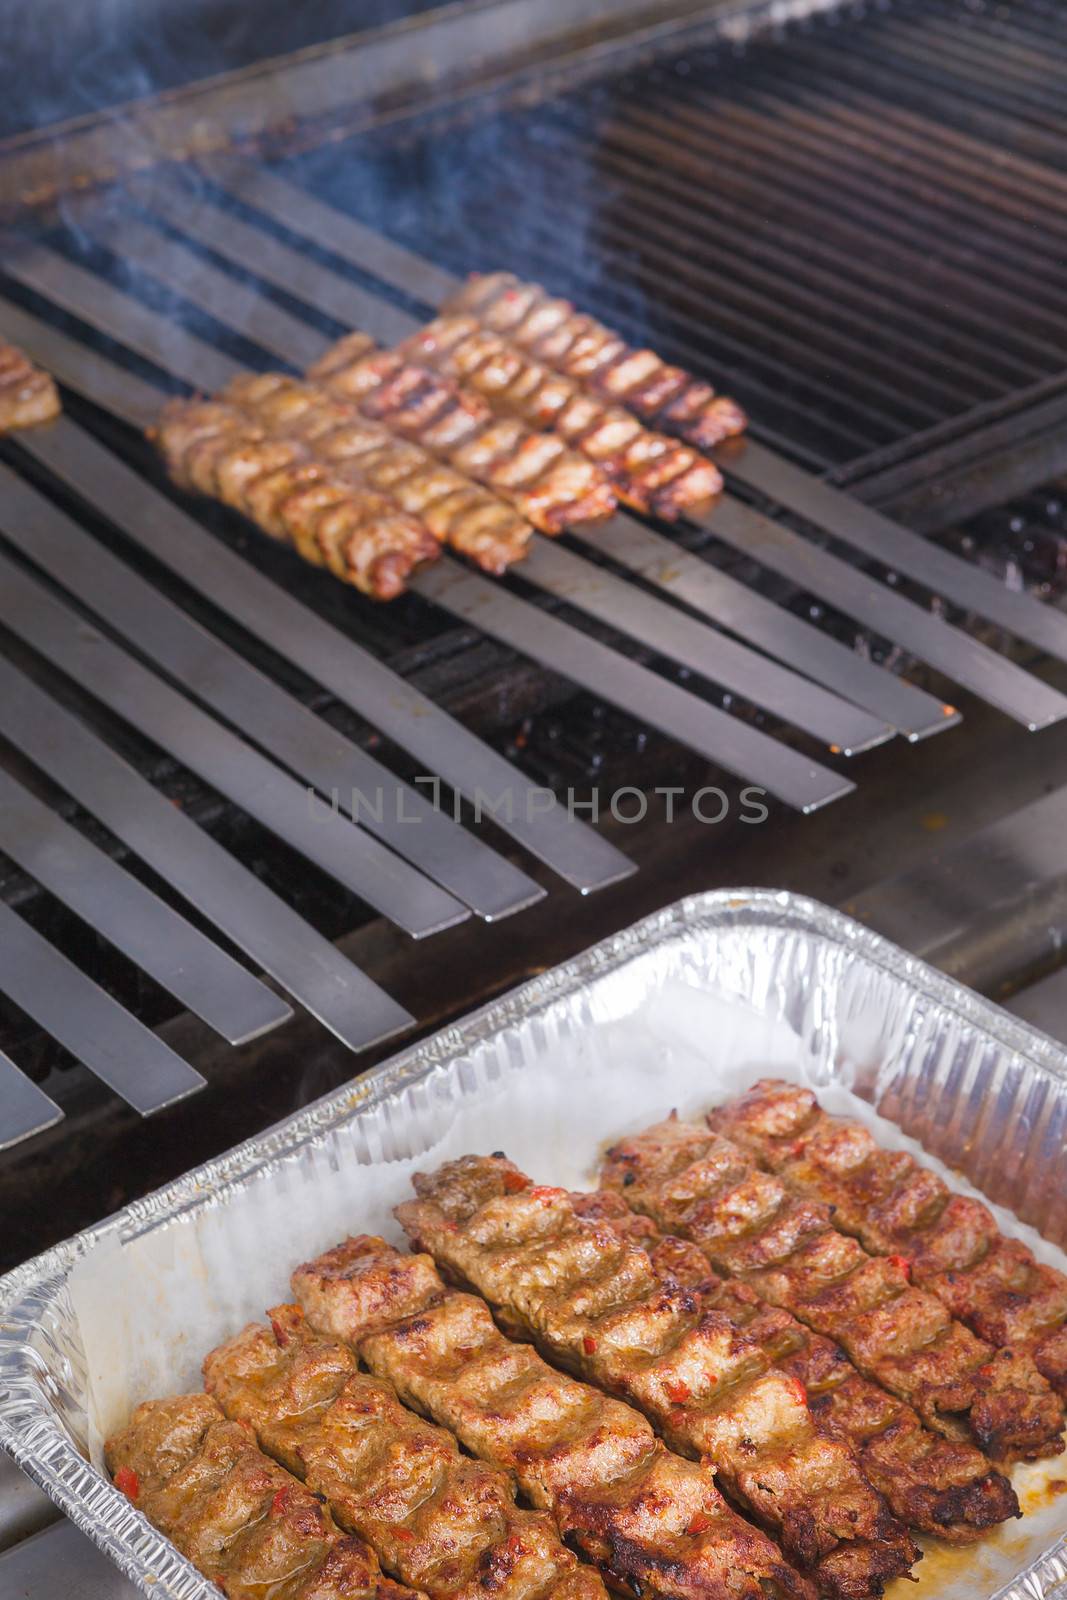 Cooking Adana Lamb Kebabs on the Restaurant Style Grill by coskun